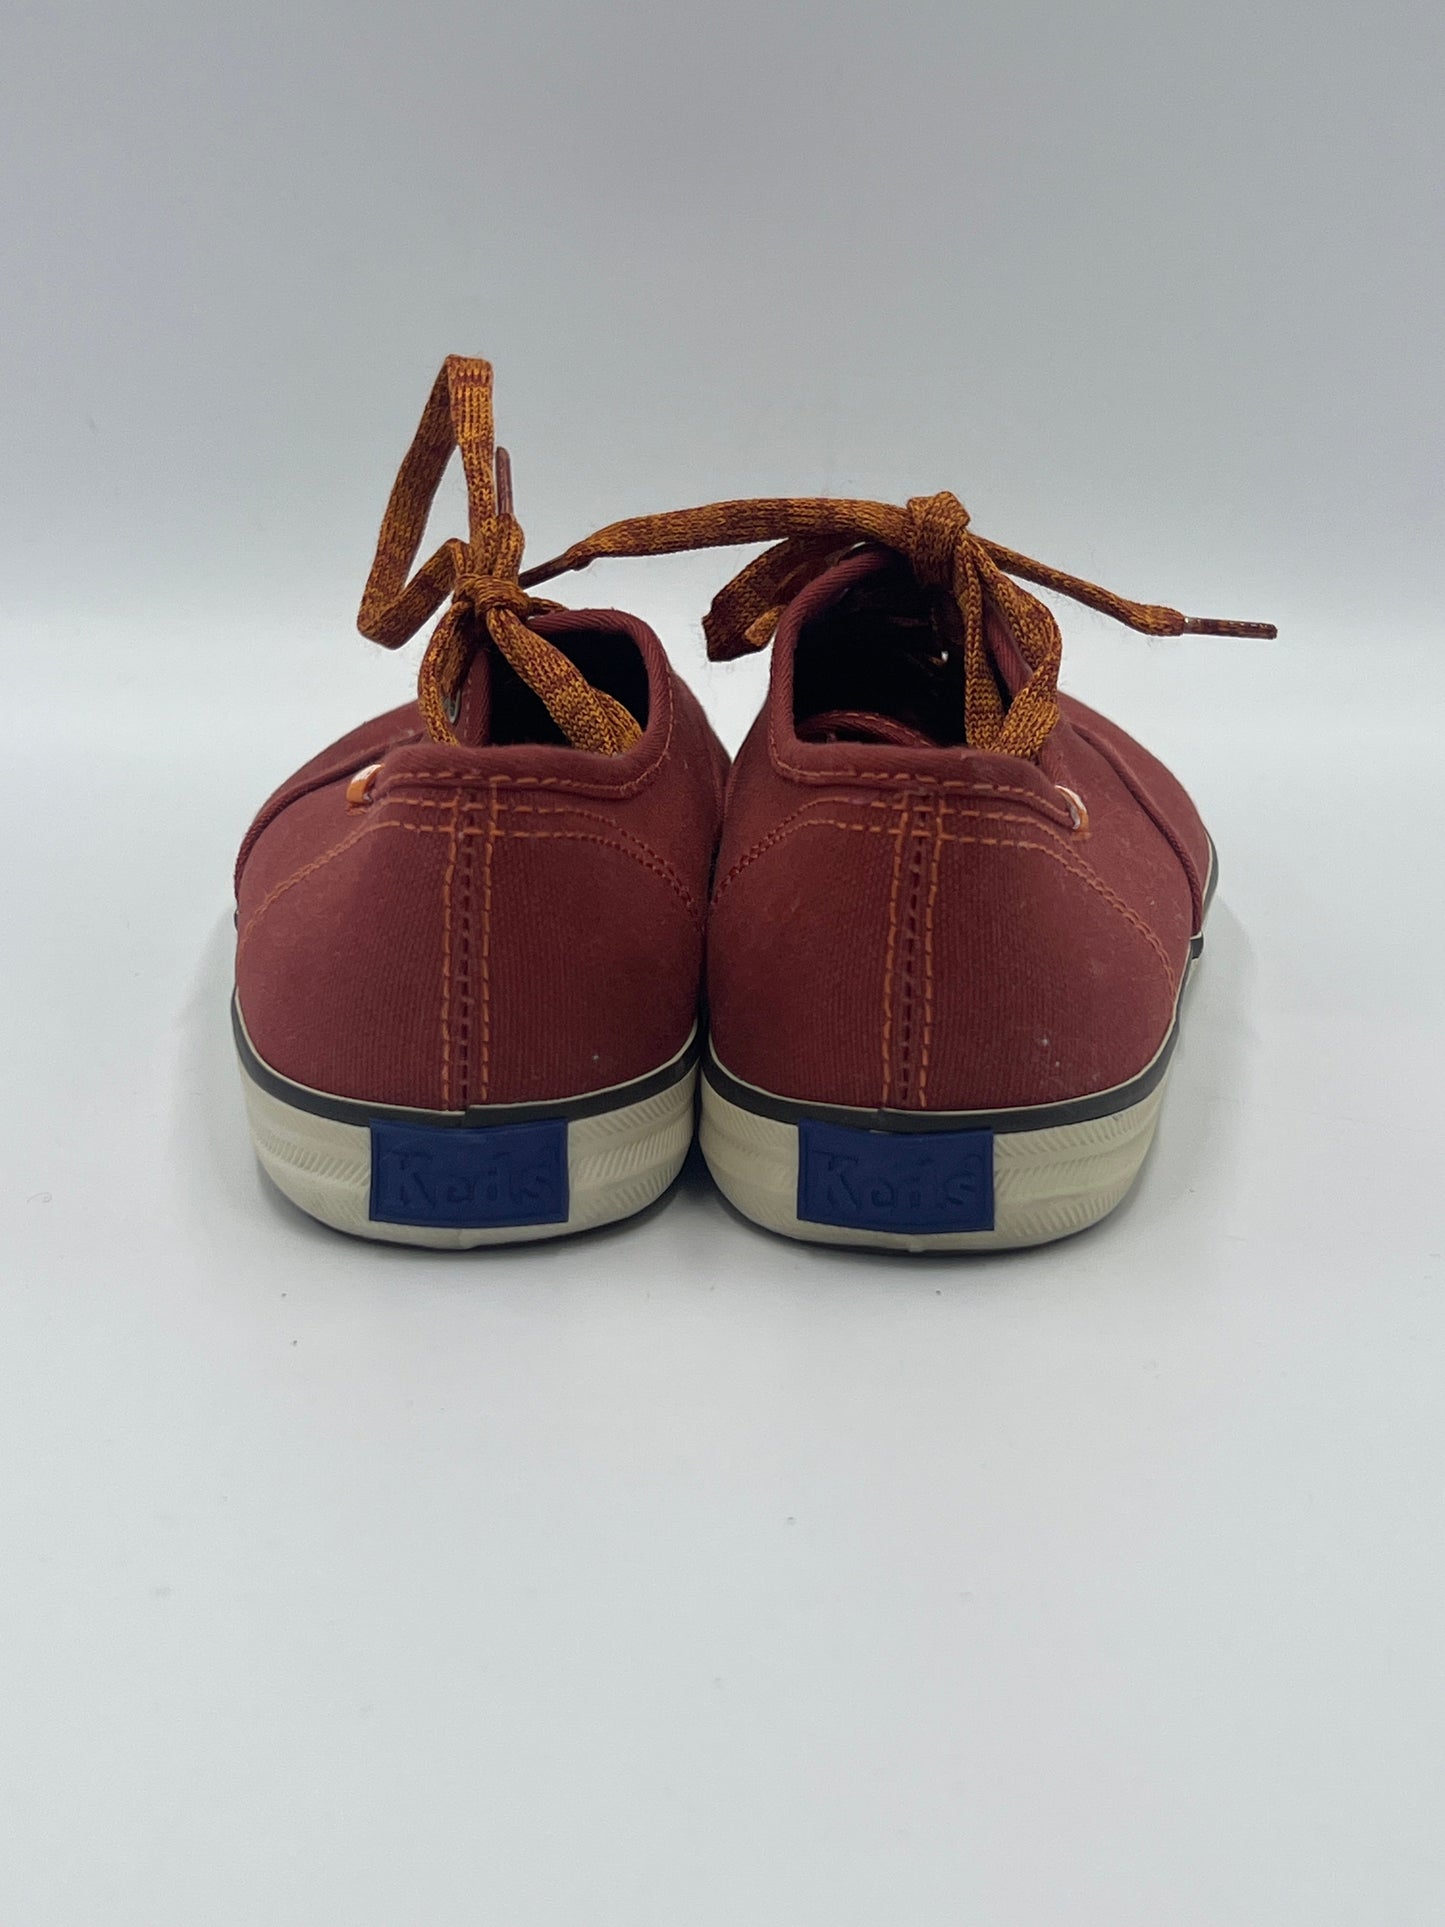 Shoes Sneakers By Keds  Size: 7.5